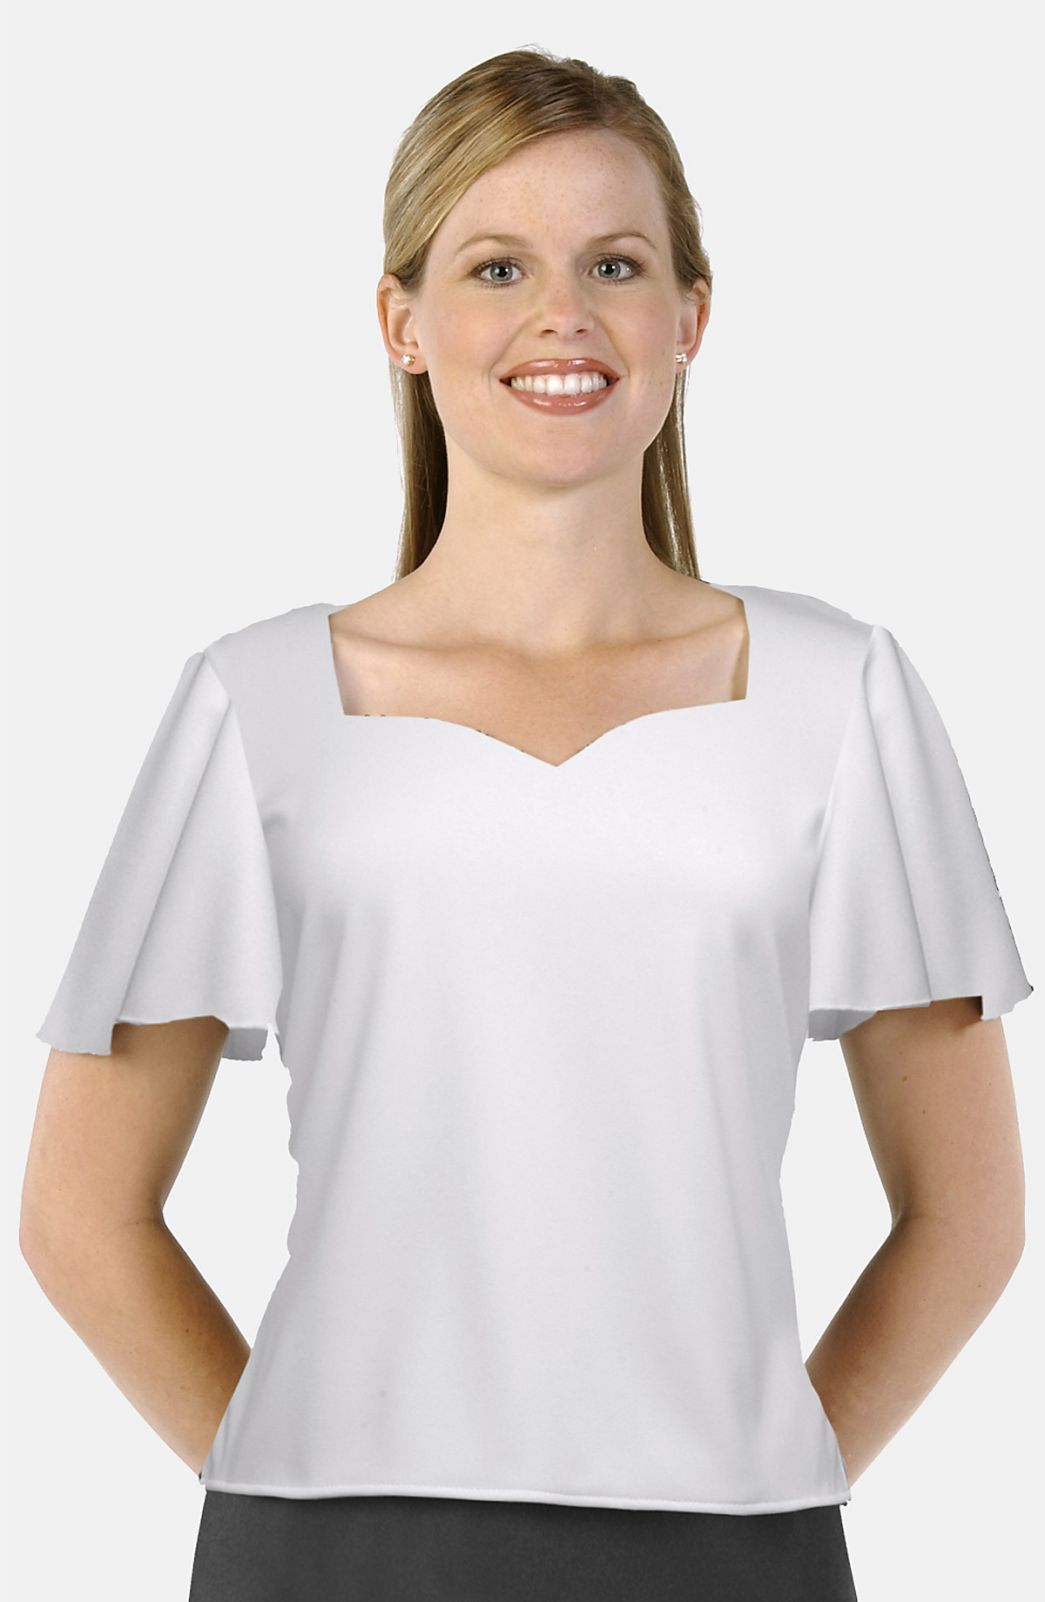 Chorale Women's Outfit Rental (blouse and skirt)